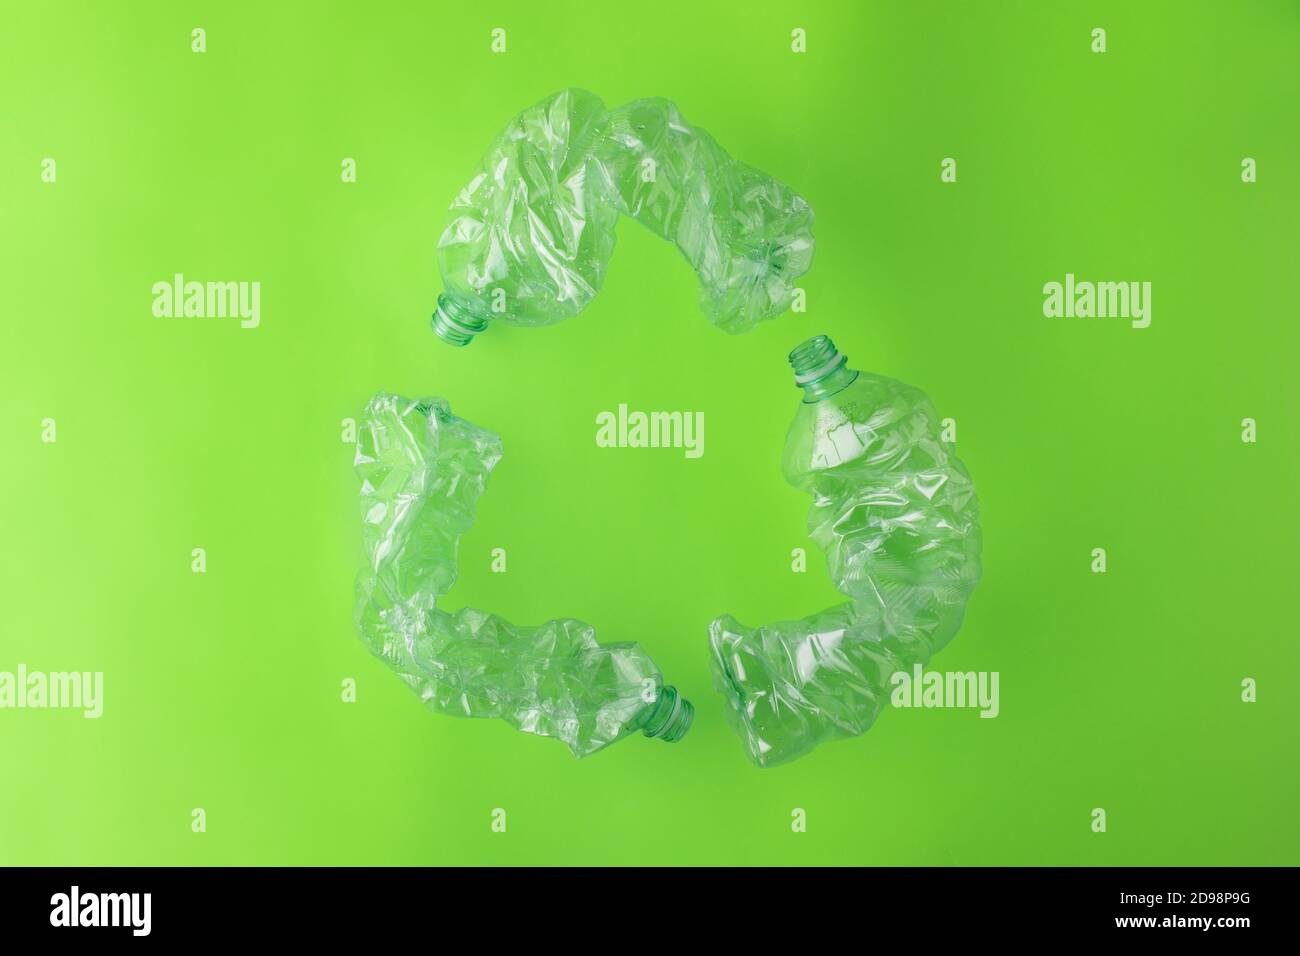 Recycling Symbol Made with Three Plastic Bottles on Green Background Stock Photo